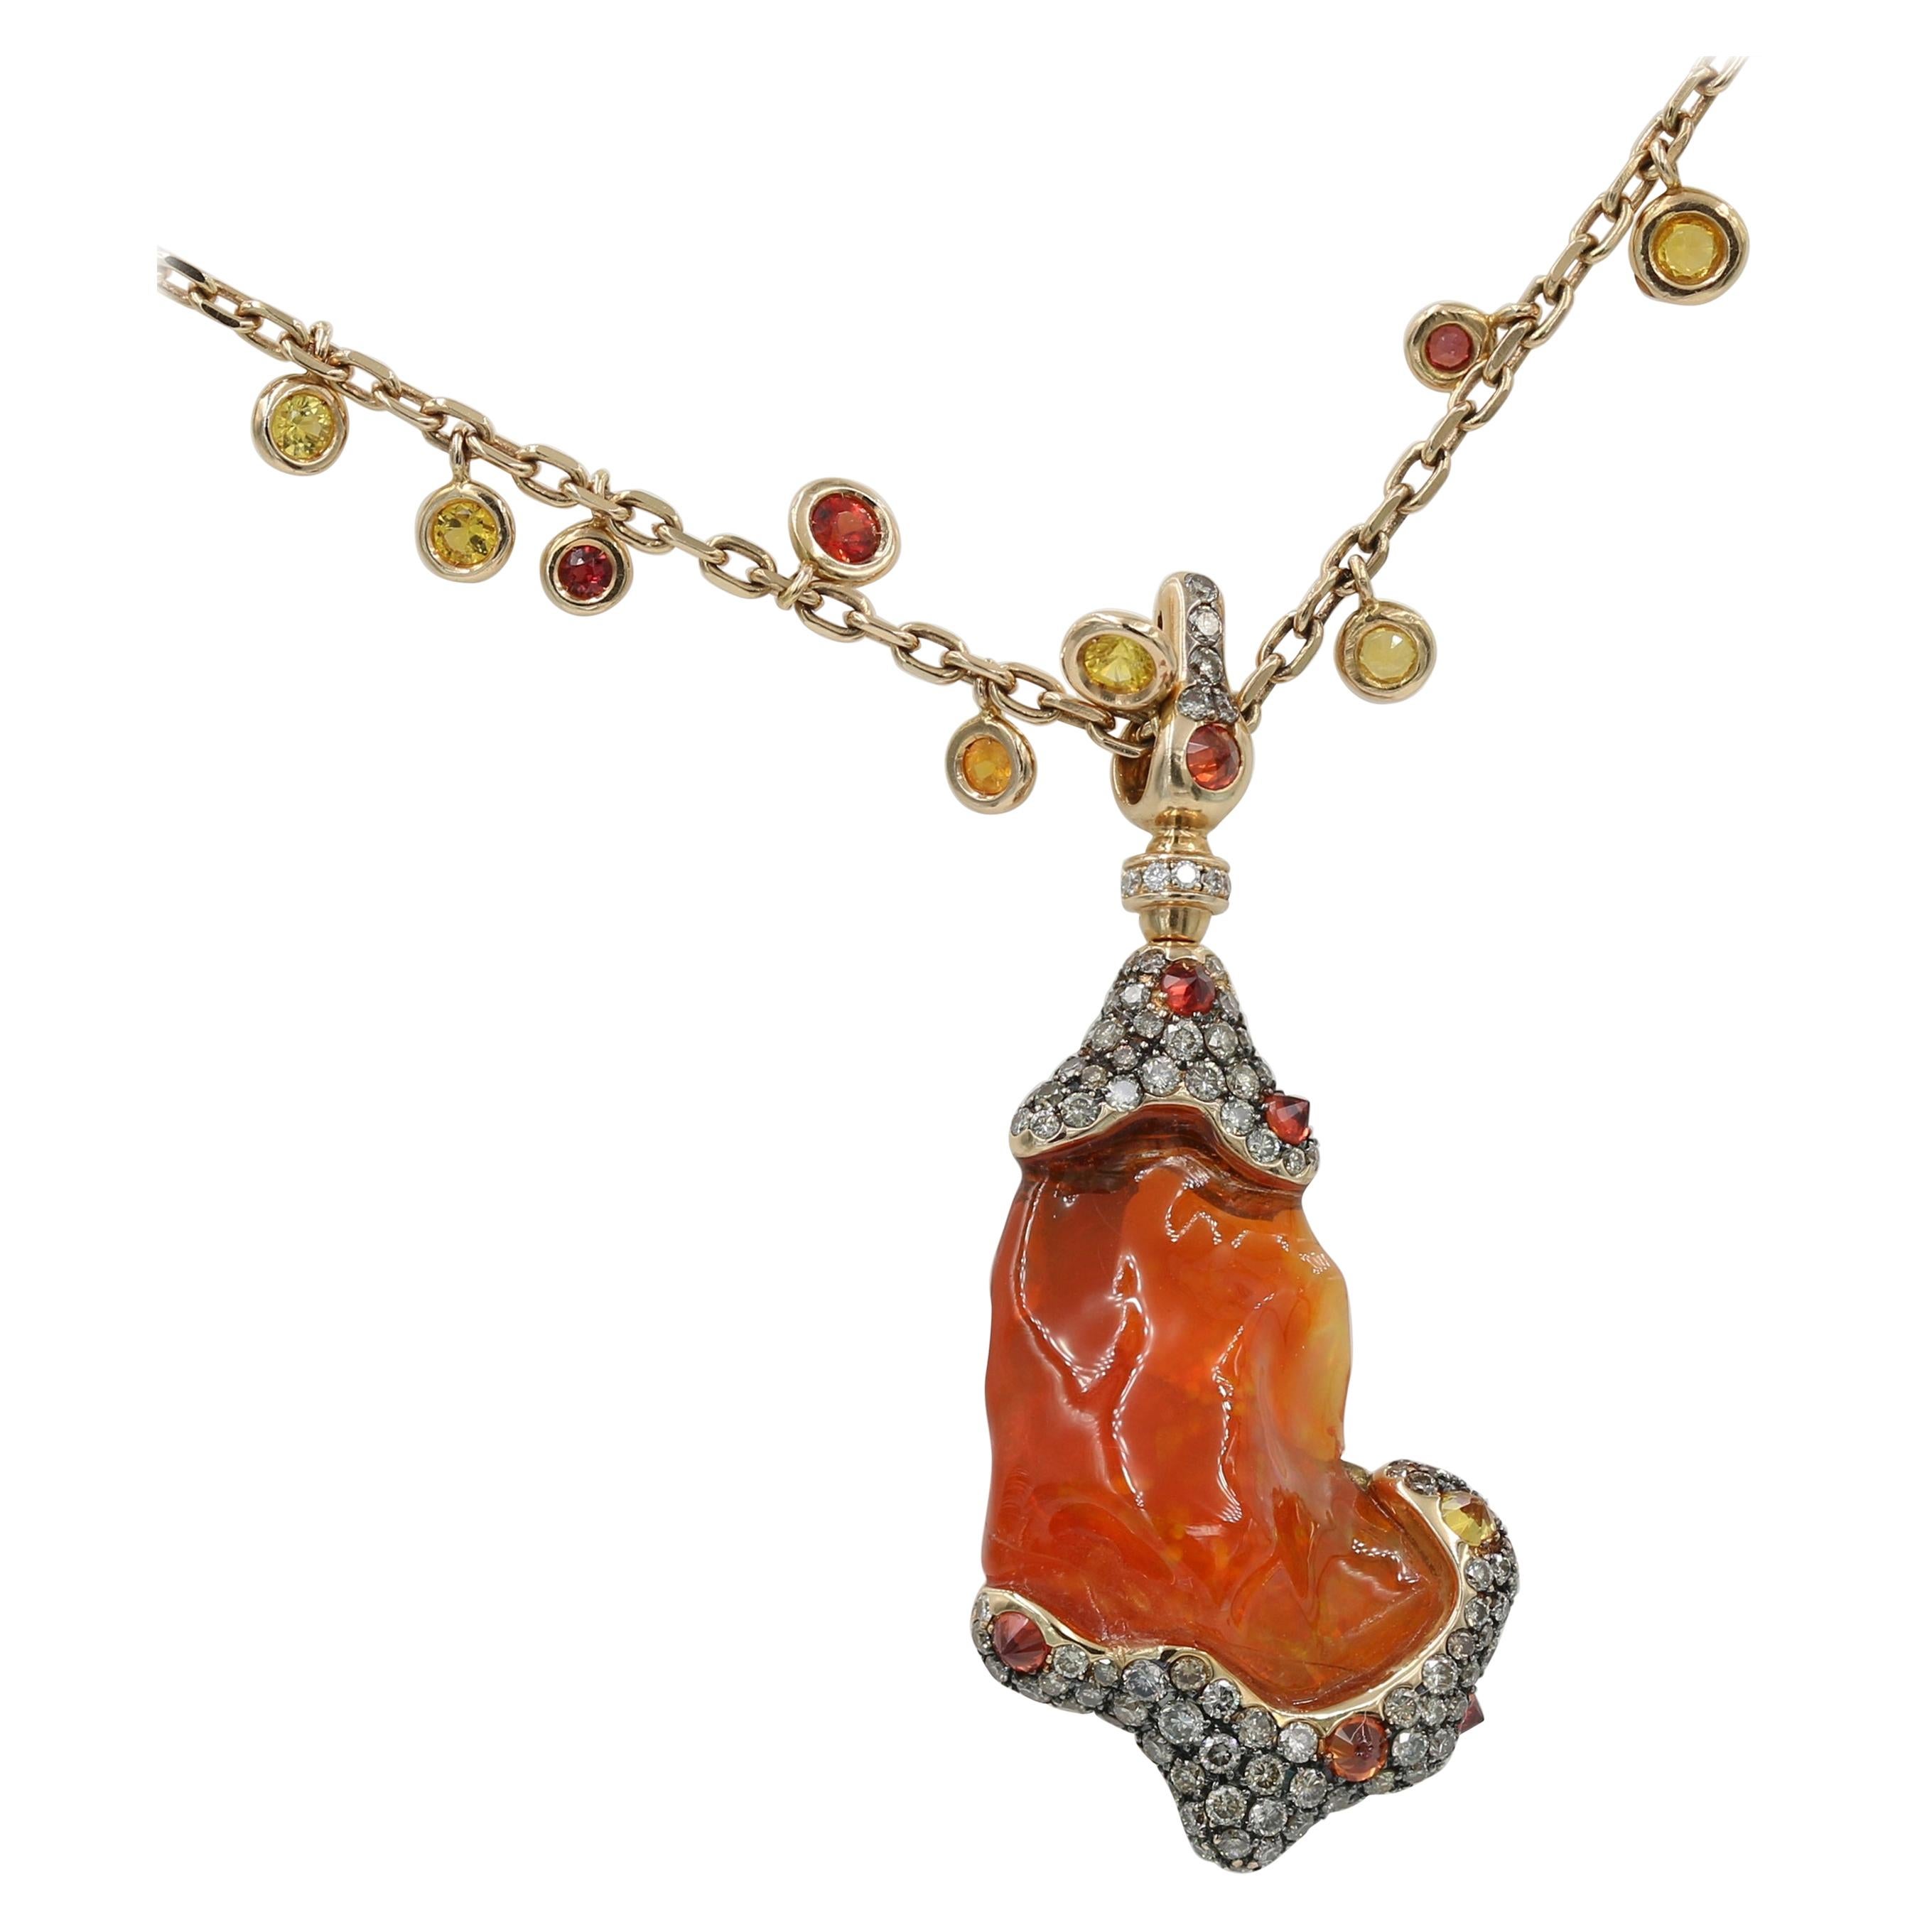 Italian Design "Lava" Necklace with Fire Opal, Sapph and Dia in 18 Karat RG